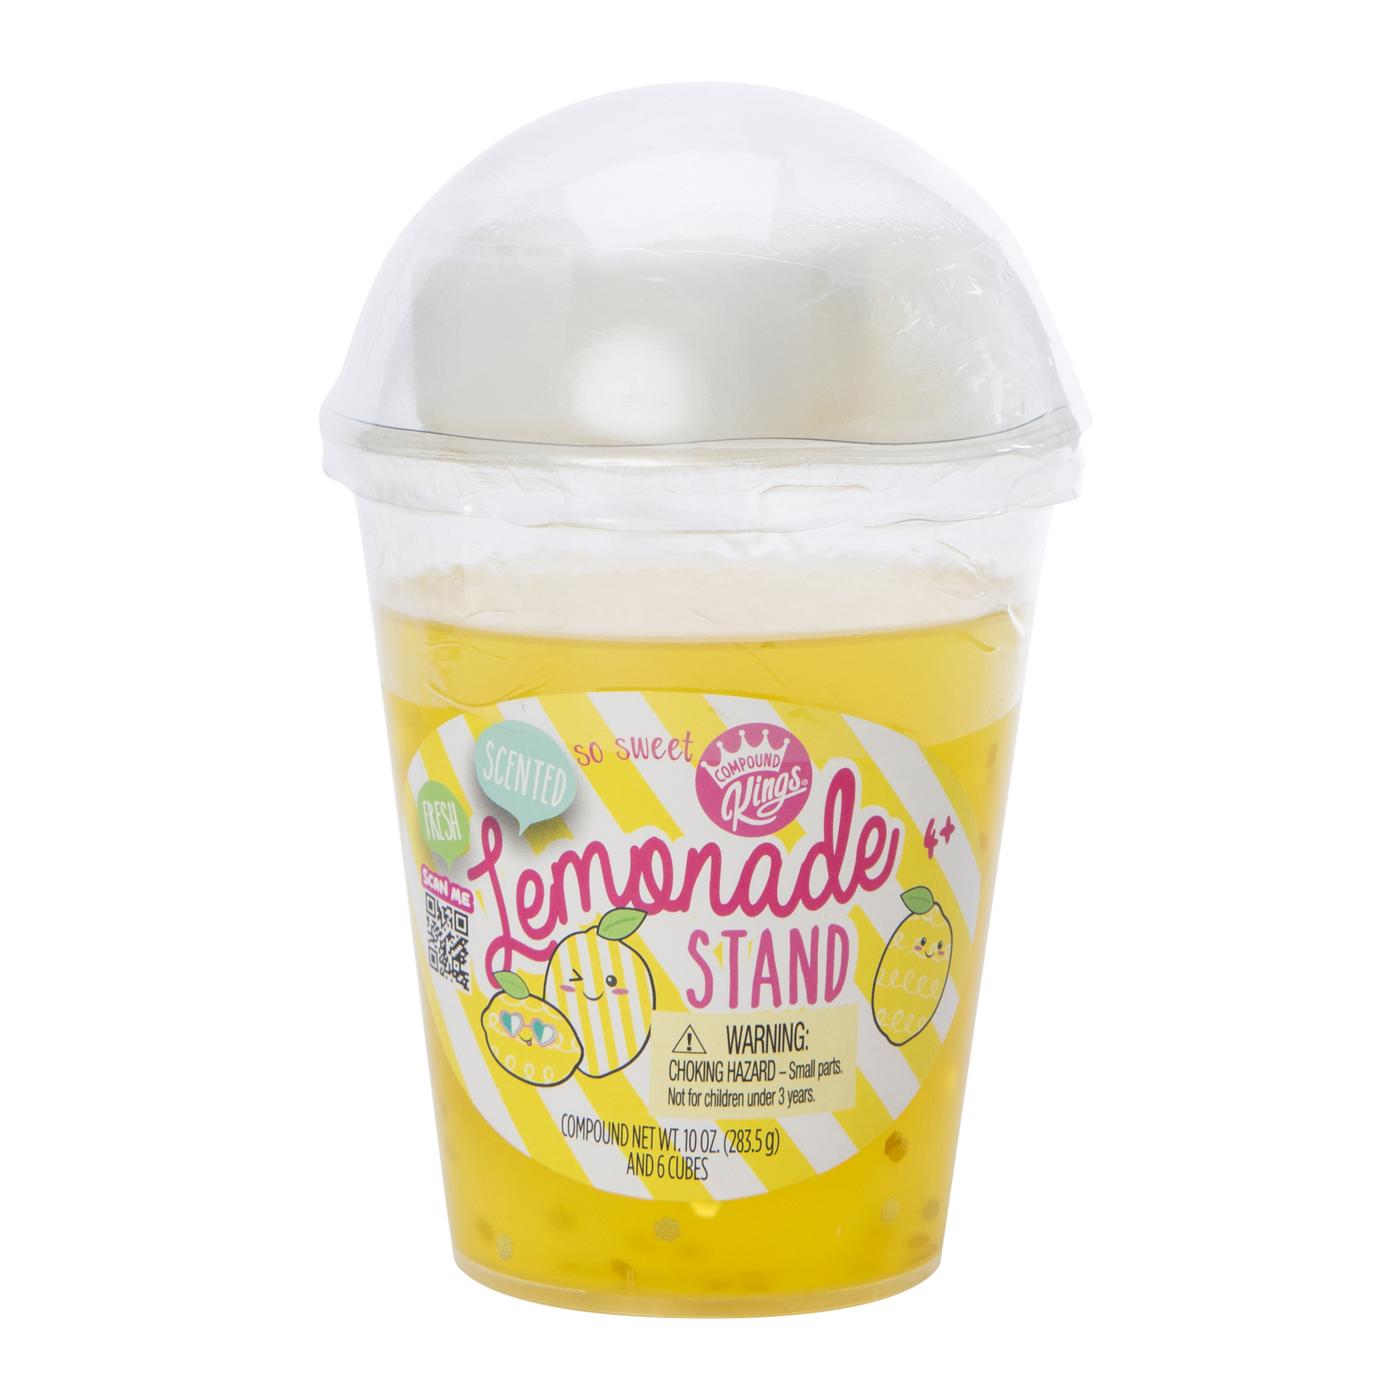 Compound Kings Lemonade Stand Jelly Cube Slime Cup - Assorted; image 1 of 9